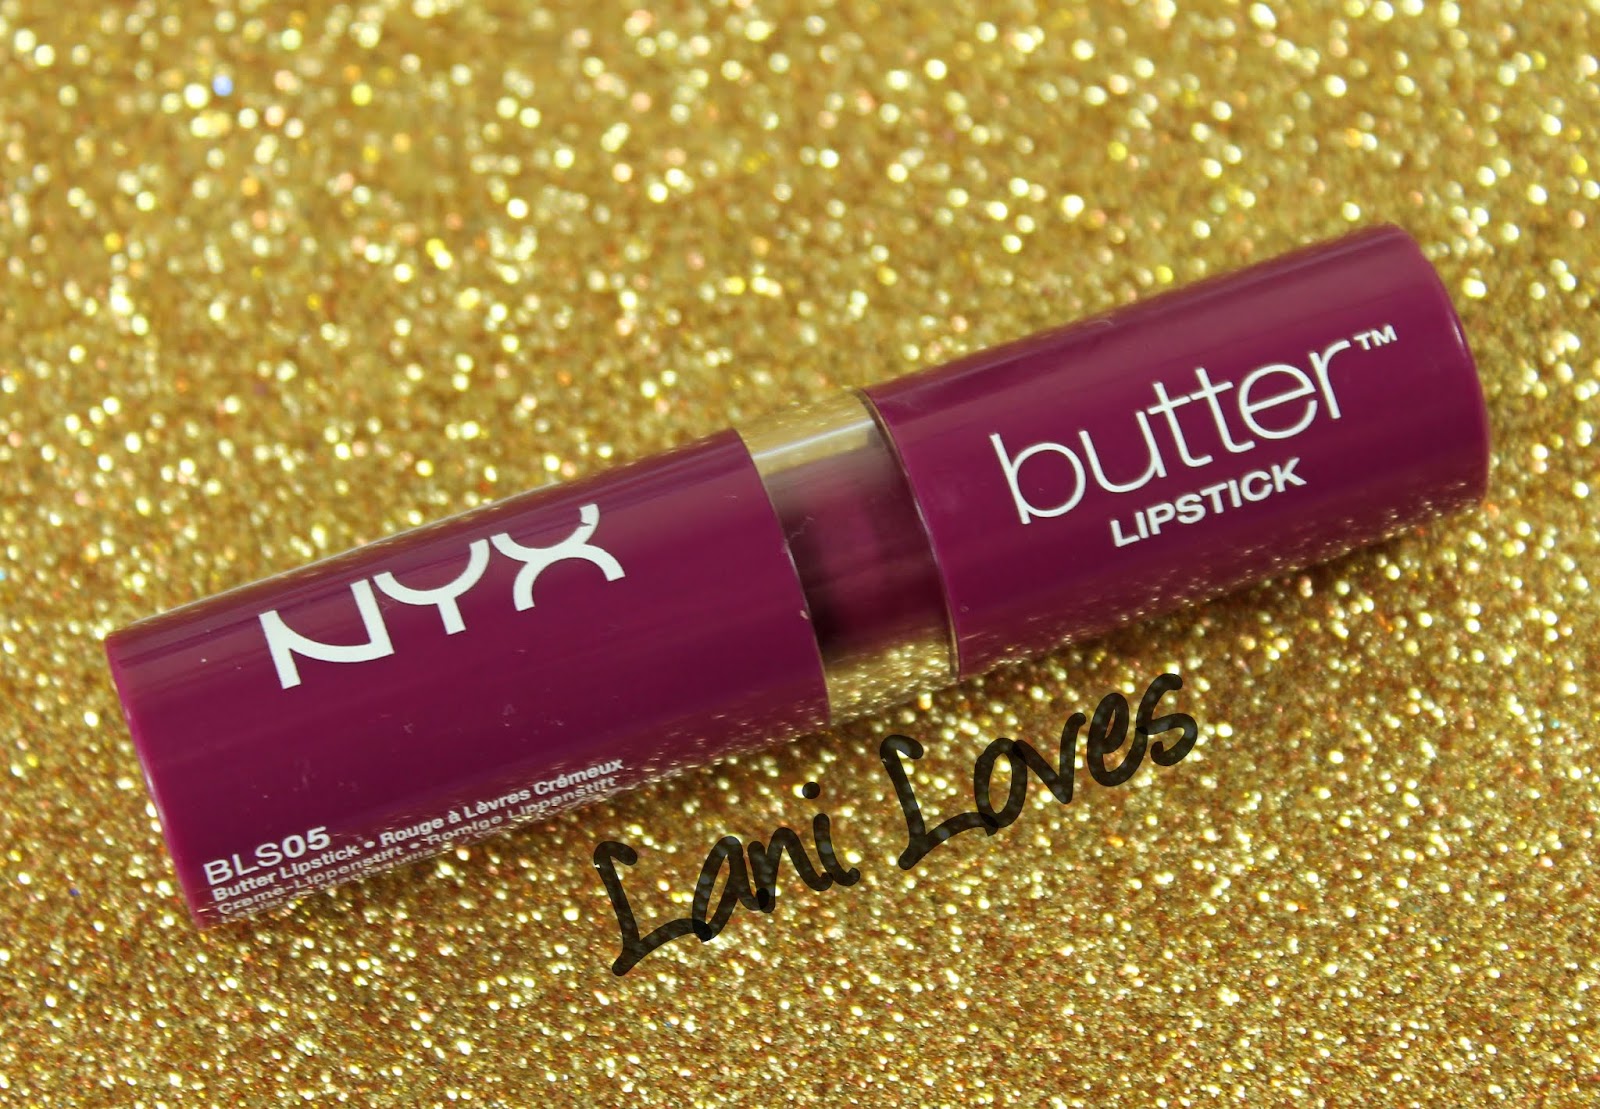 NYX Butter Lipstick - Hunk Swatches & Review